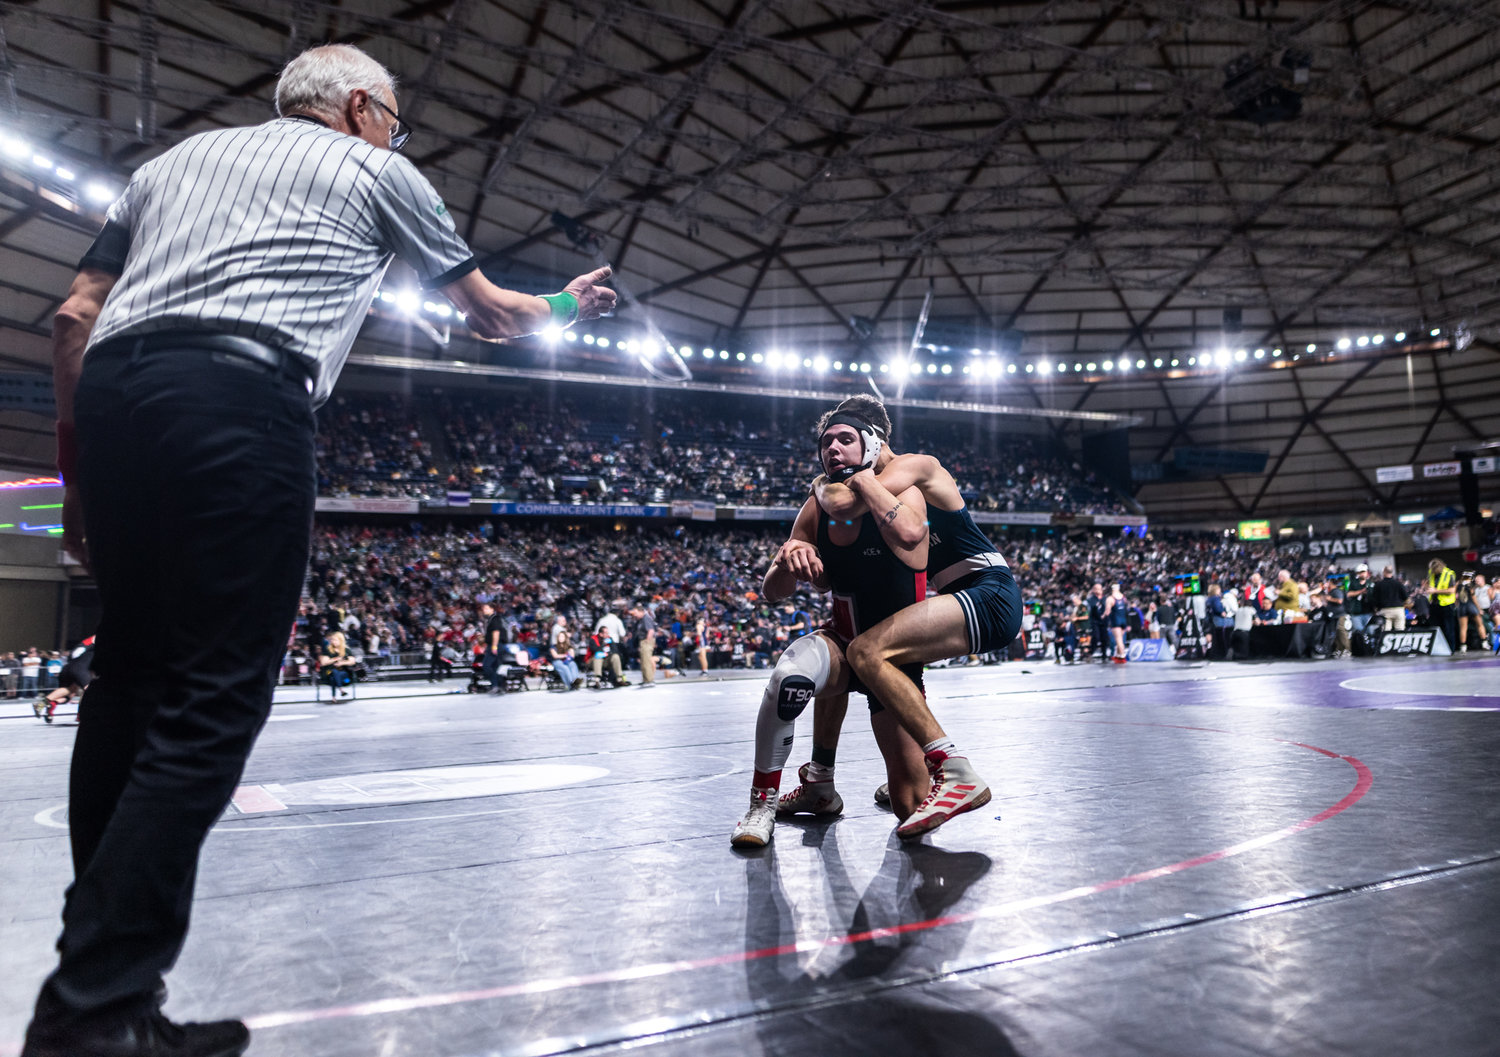 Tenino’s Kysen Knox, 170 pounds, competes at Mat Classic XXXIV on Friday, February 17, 2023, at the Tacoma Dome. (Joshua Hart/For The Chronicle)